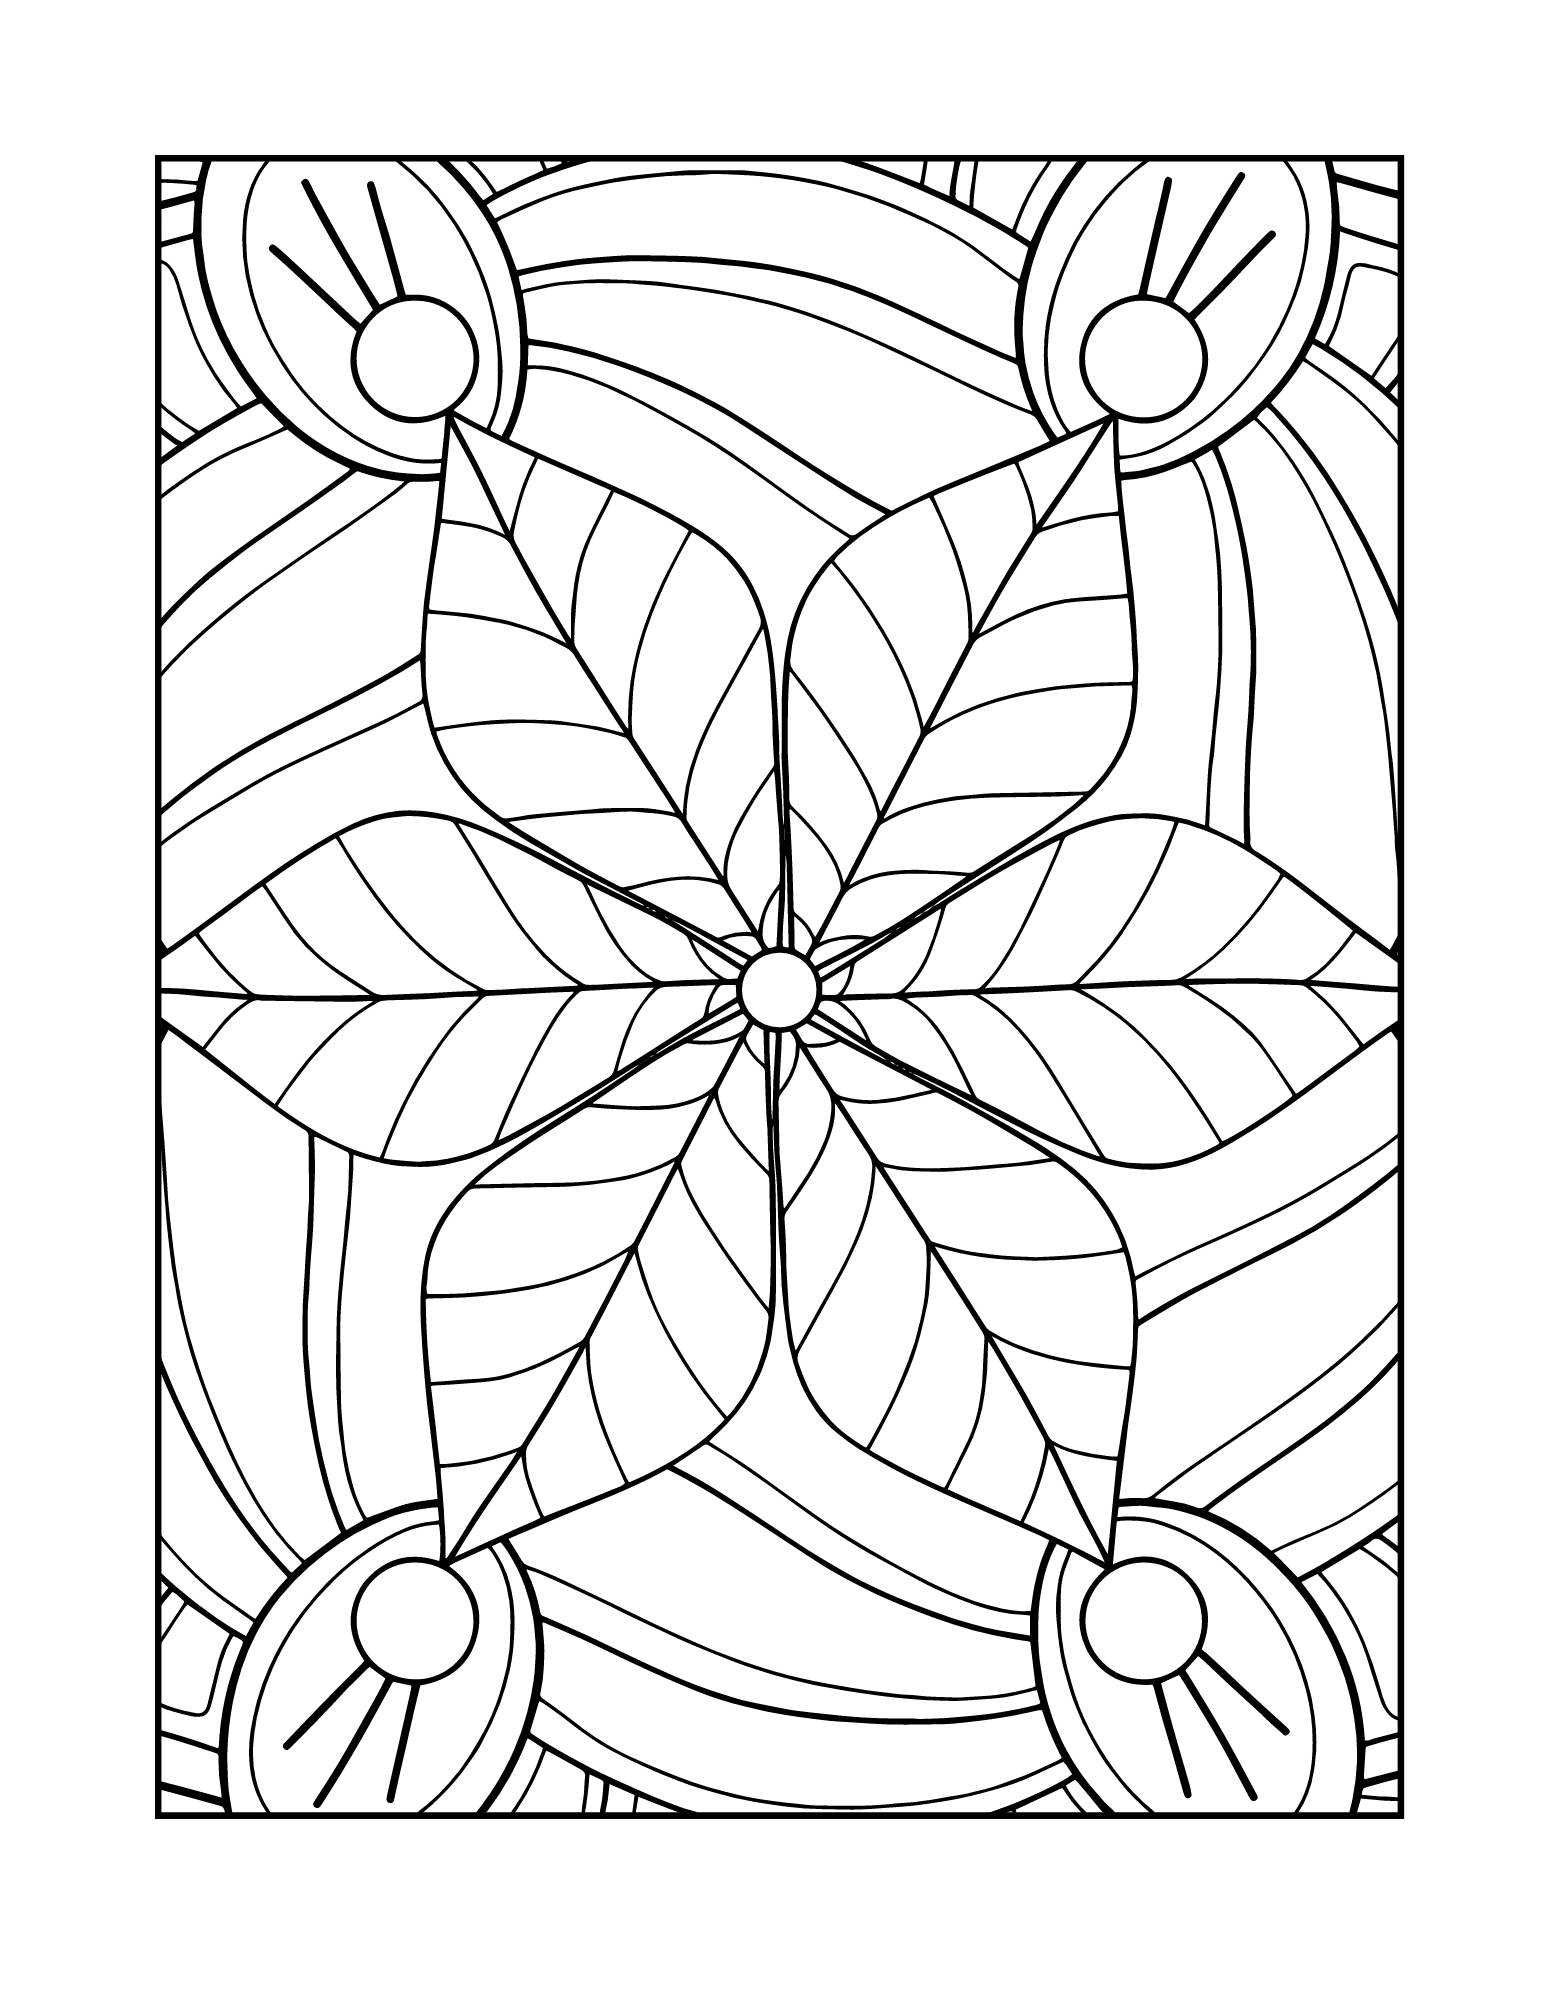 80 Mandalas Adults Coloring Pages Volume 1: mandala coloring book for all:  80 mindful patterns and mandalas coloring book: Stress relieving and relaxi  (Paperback)